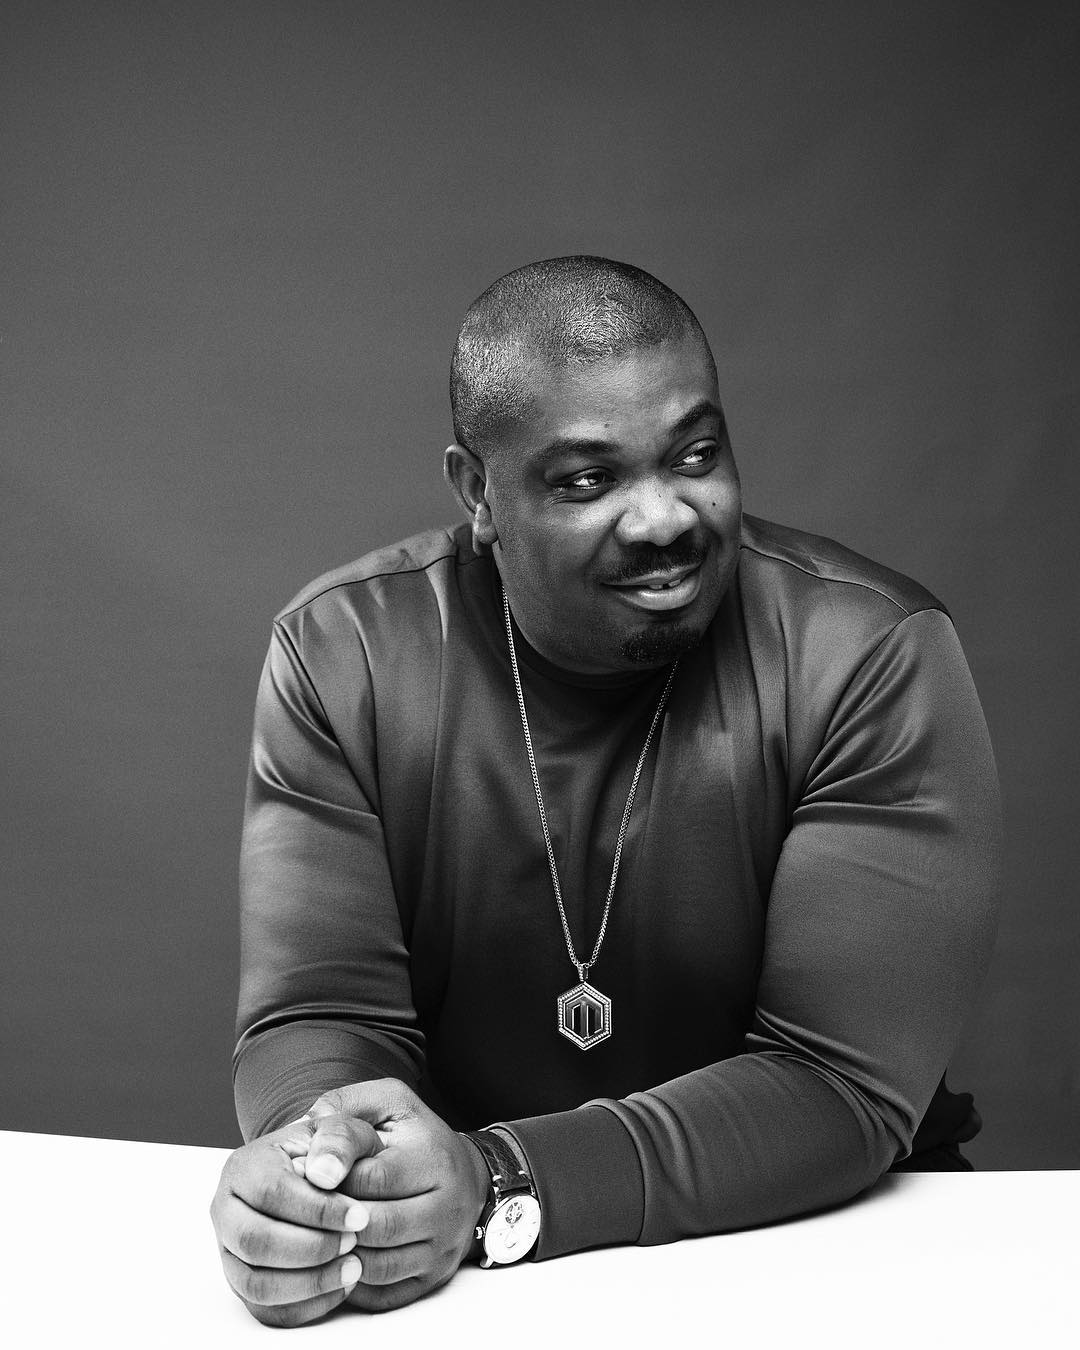 Choosing music over family cost Don Jazzy his first marriage at 22